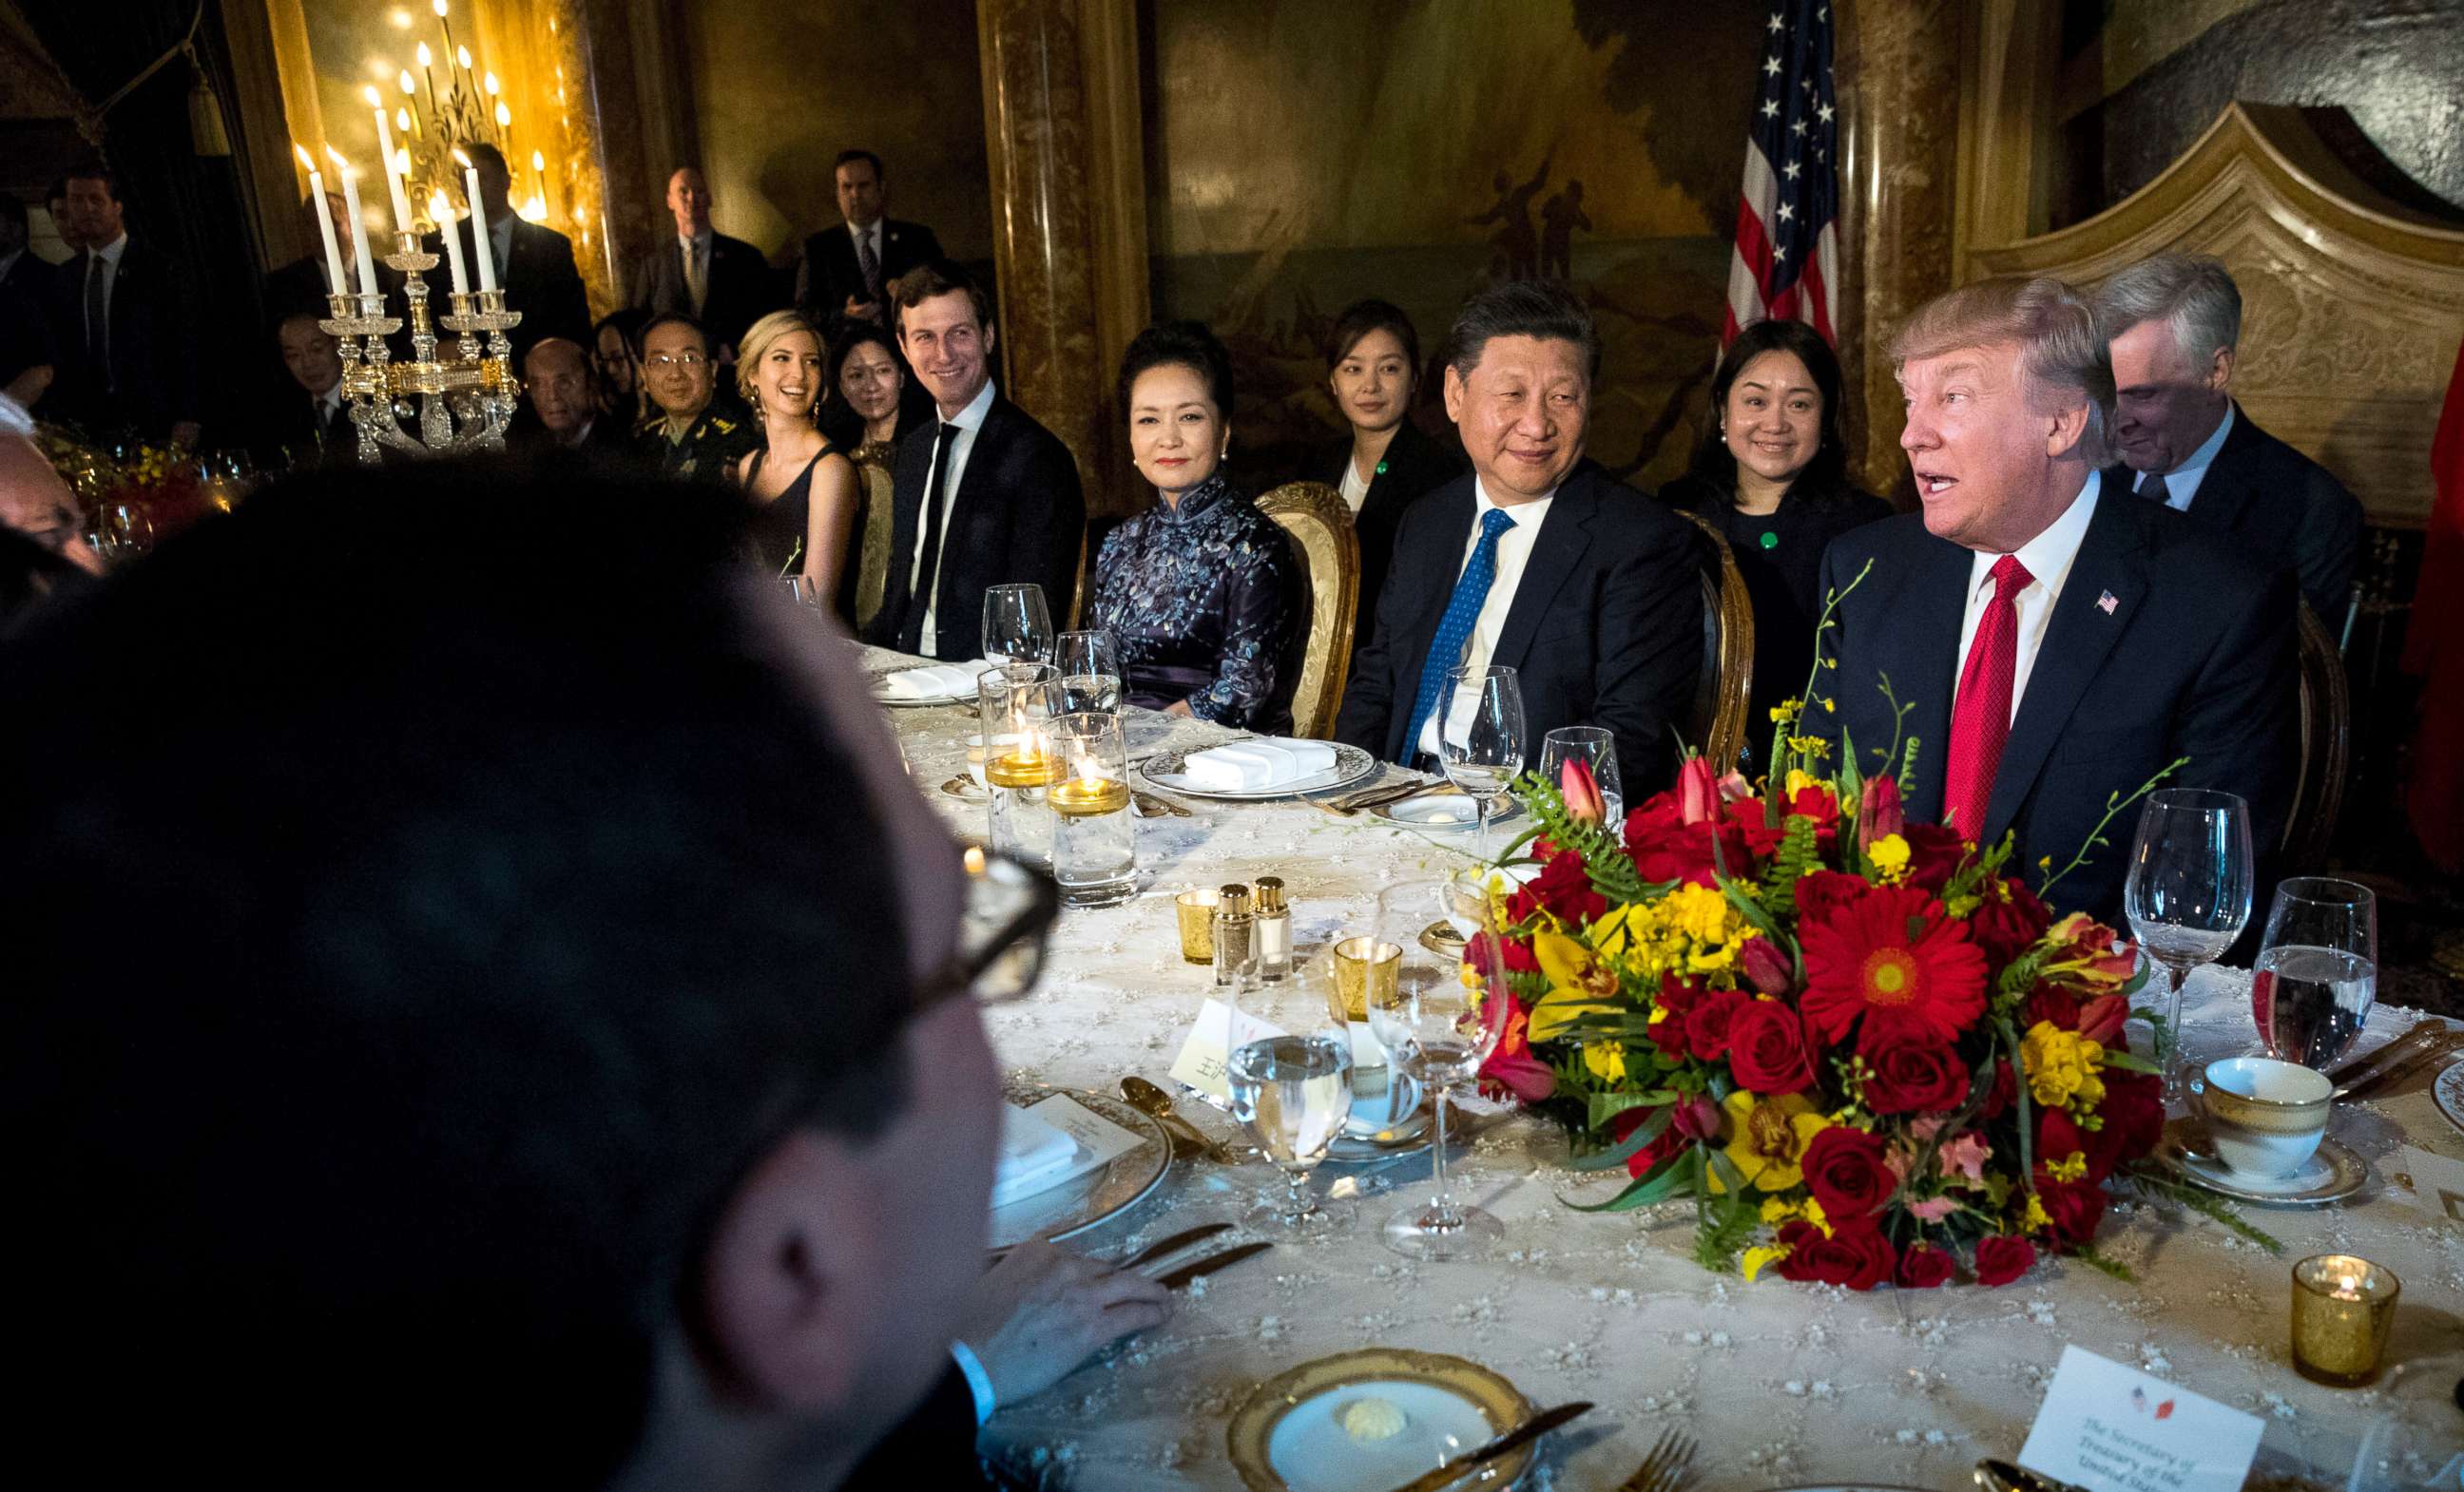 PHOTO: President Donald Trump and President Xi Jinping of China speak during a dinner at Trump's Mar-a-Lago resort in Palm Beach, Fla., April, 6, 2017.